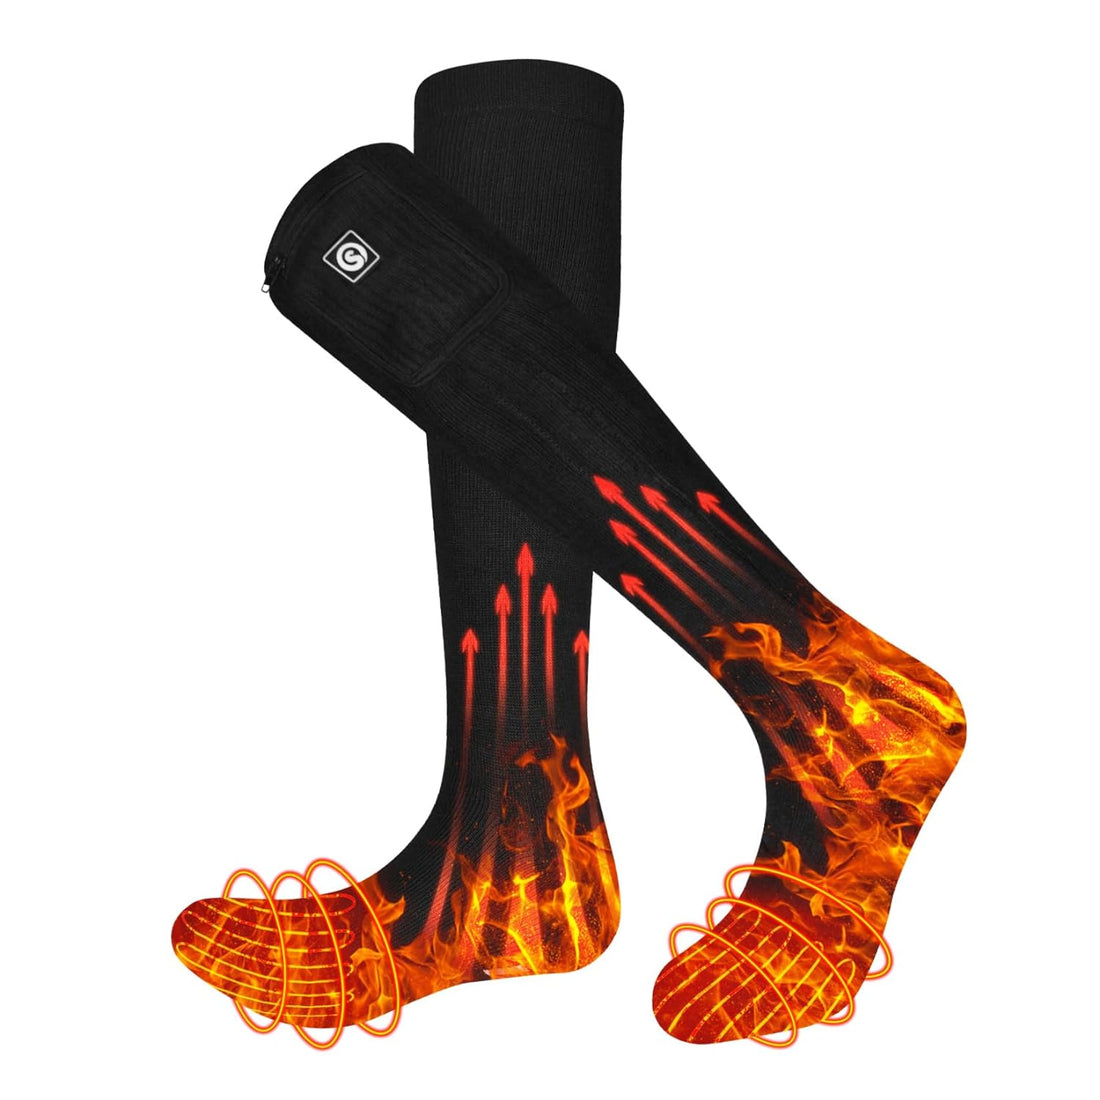 Heated Socks, Rechargeable Electric Socks for Men Women, 7.7V Battery Power Thermal Heating Socks Winter Foot Warmers for Hunting Hiking Camping Fishing Zipper Battery Pocket